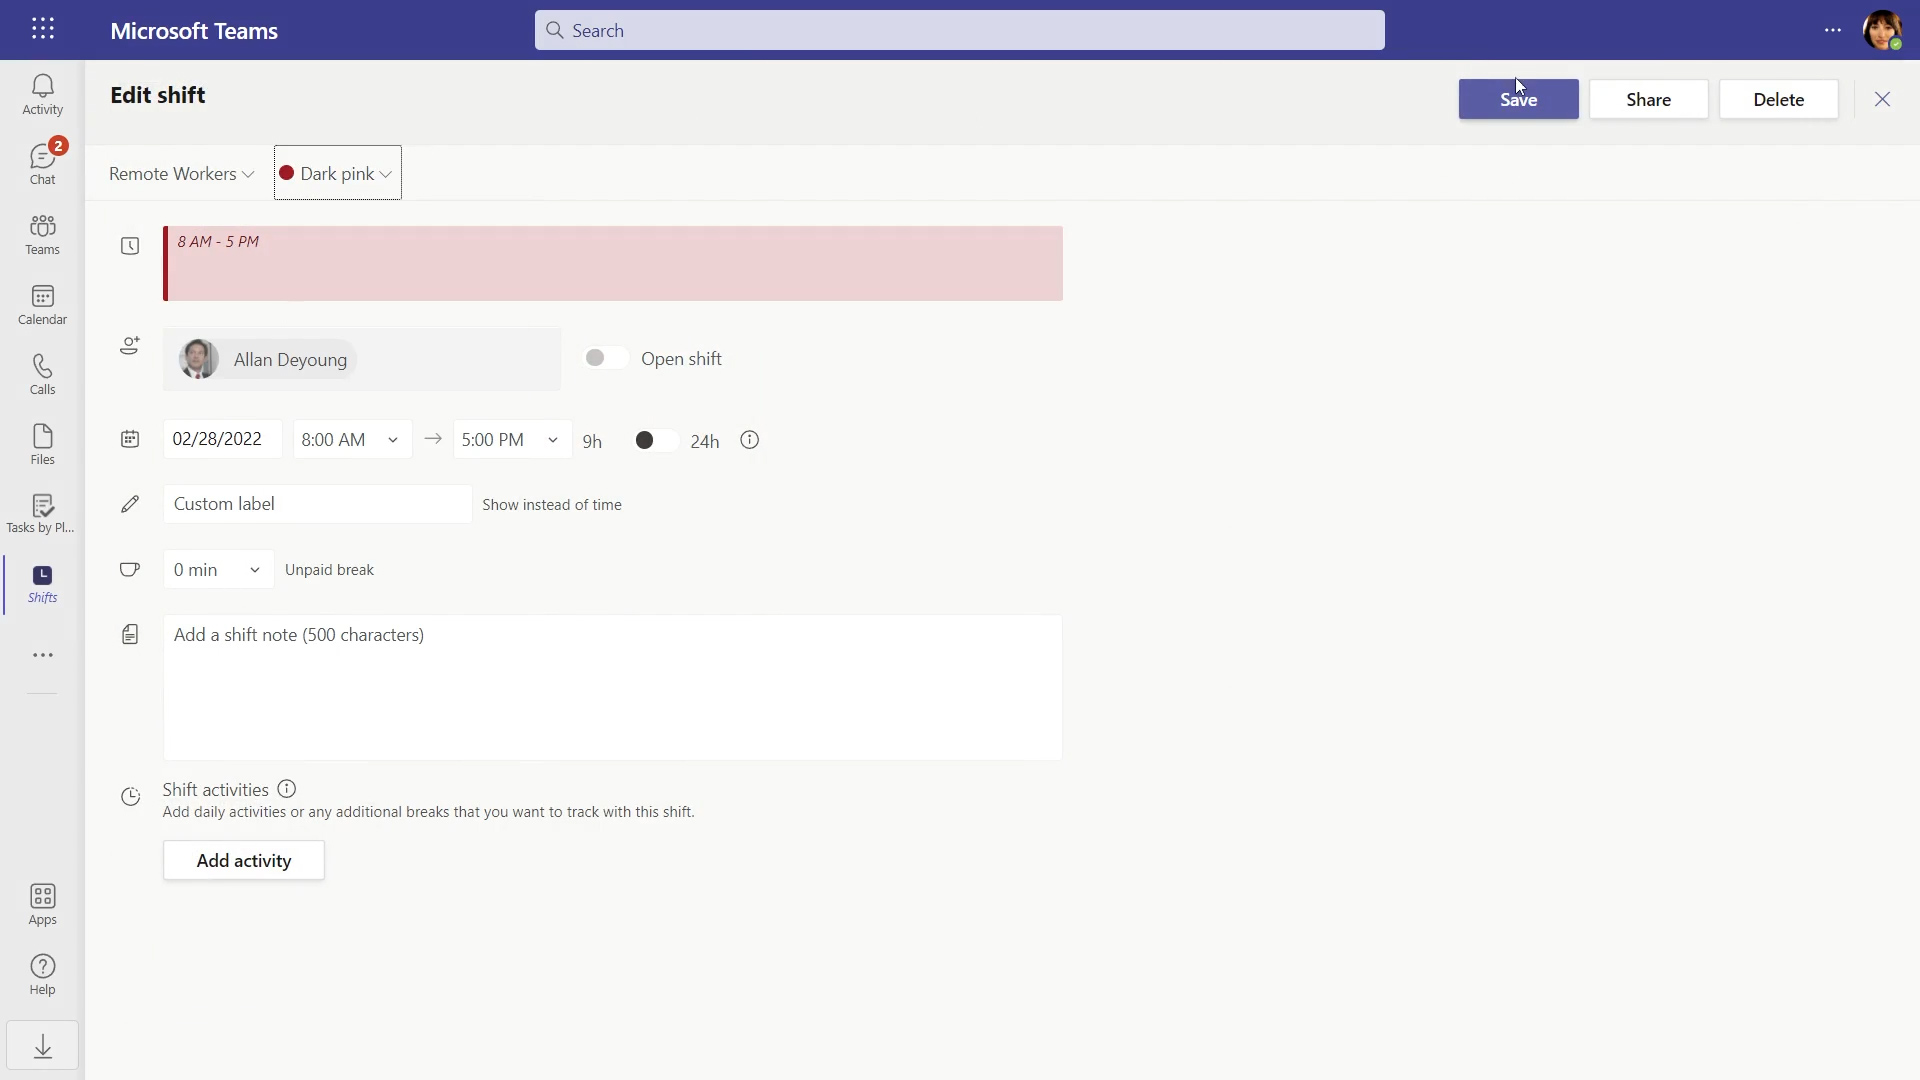 screenshot showing the "Edit Shift" window in the Shifts app in Microsoft Teams